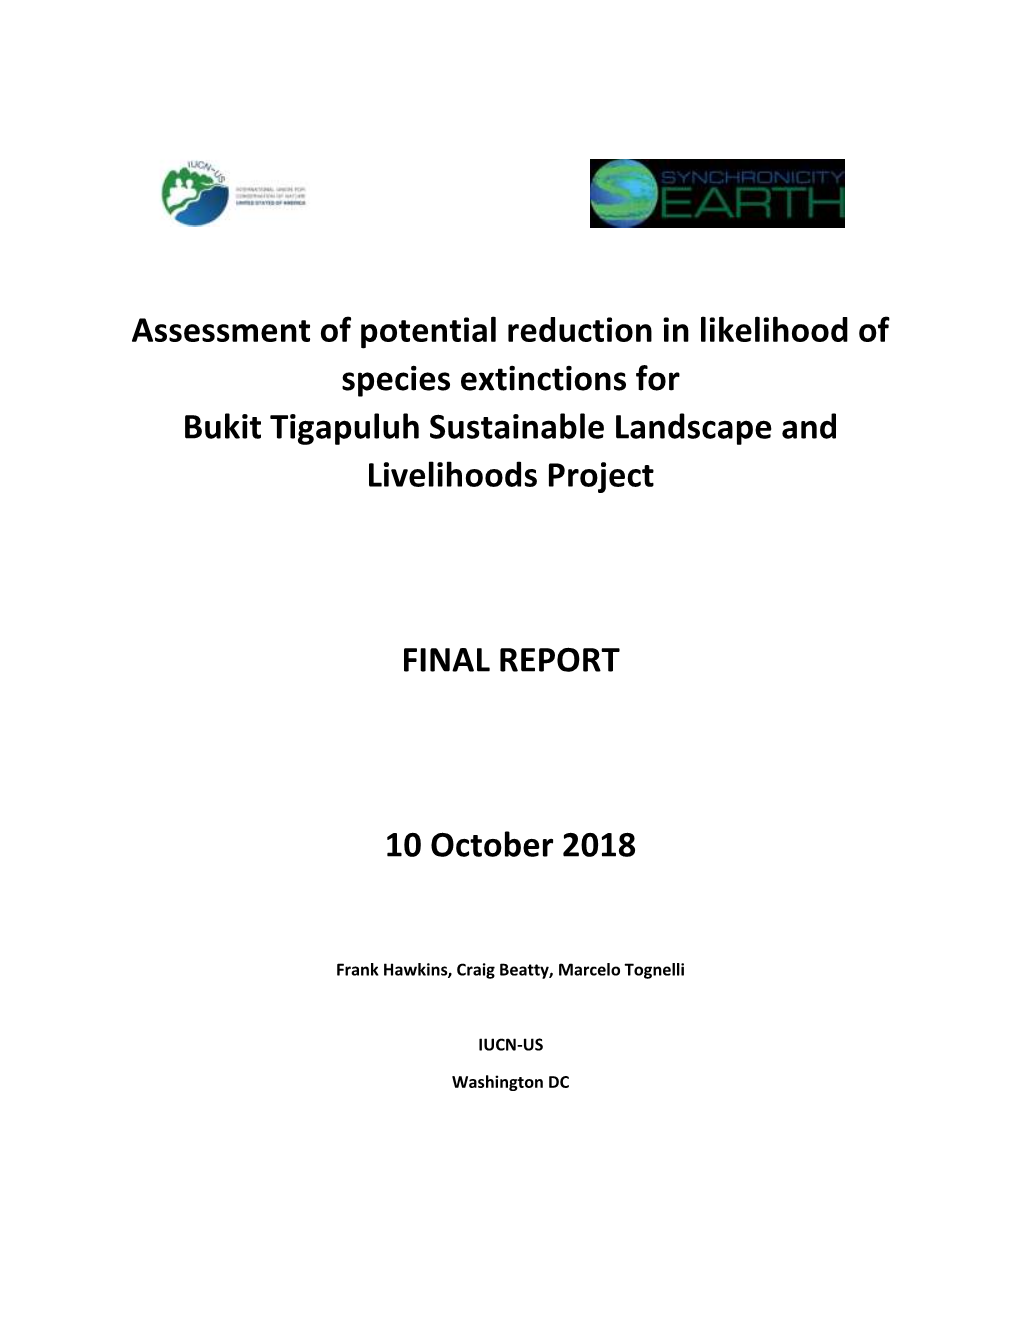 Assessment of Potential Reduction in Likelihood of Species Extinctions for Bukit Tigapuluh Sustainable Landscape and Livelihoods Project